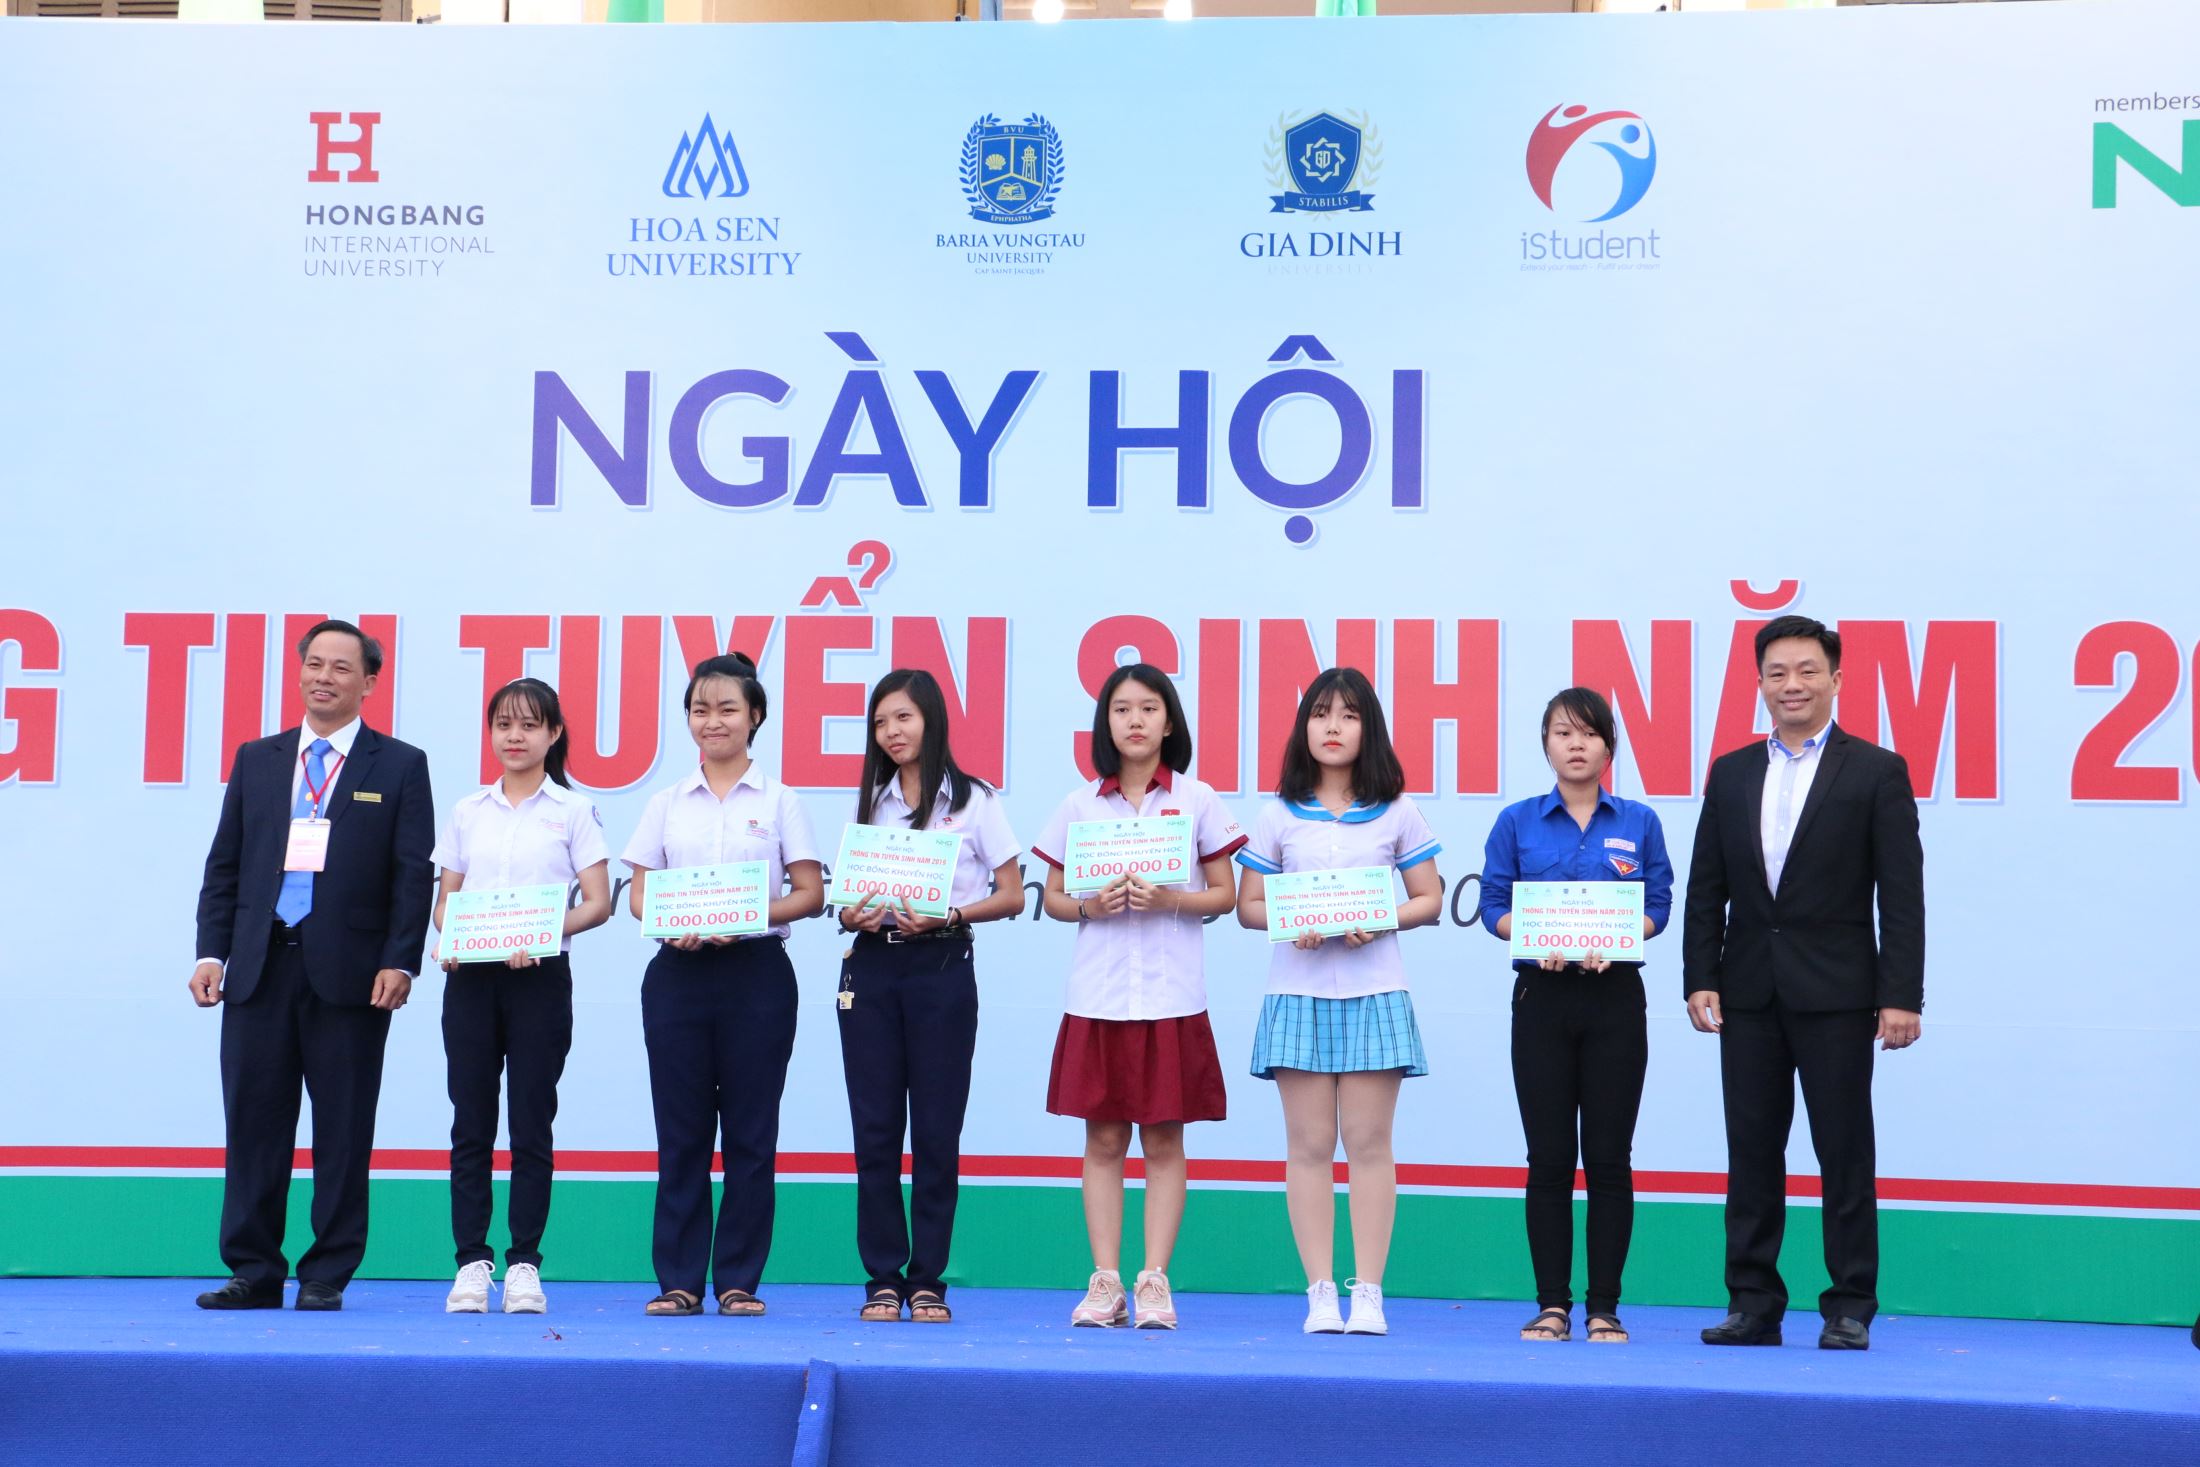 The board of organizers awarded  scholarships with a total value of 14 million VND to 14 students who overcame difficulties to study well. Dr. Vũ Tường Thụy  - Vice President of Hoa Sen University (right corner) and Dr. Vũ Văn Đông – Vice President of Bà Rịa – Vũng Tàu University (left corner) awarded.